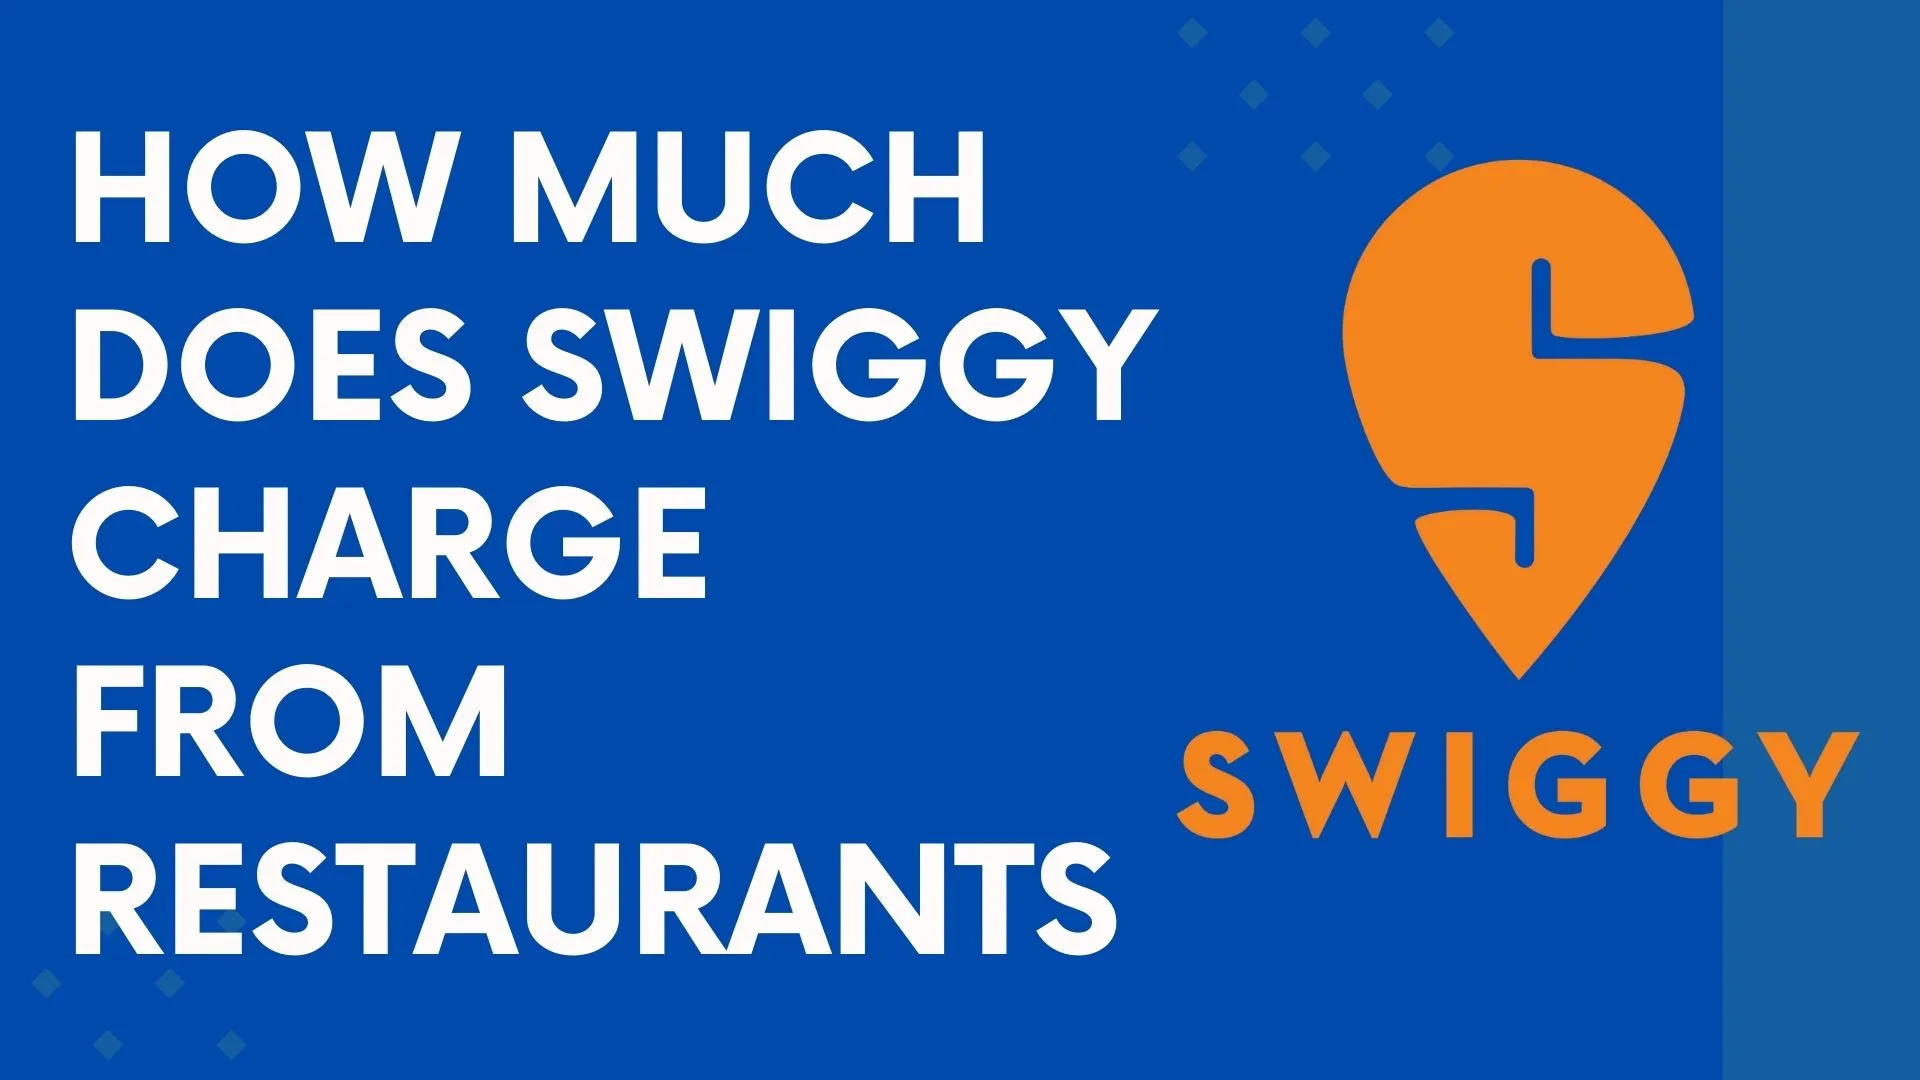 How much does swiggy charge from restaurants, Swiggy’s Fee Structure, Swiggy Commission Rate,